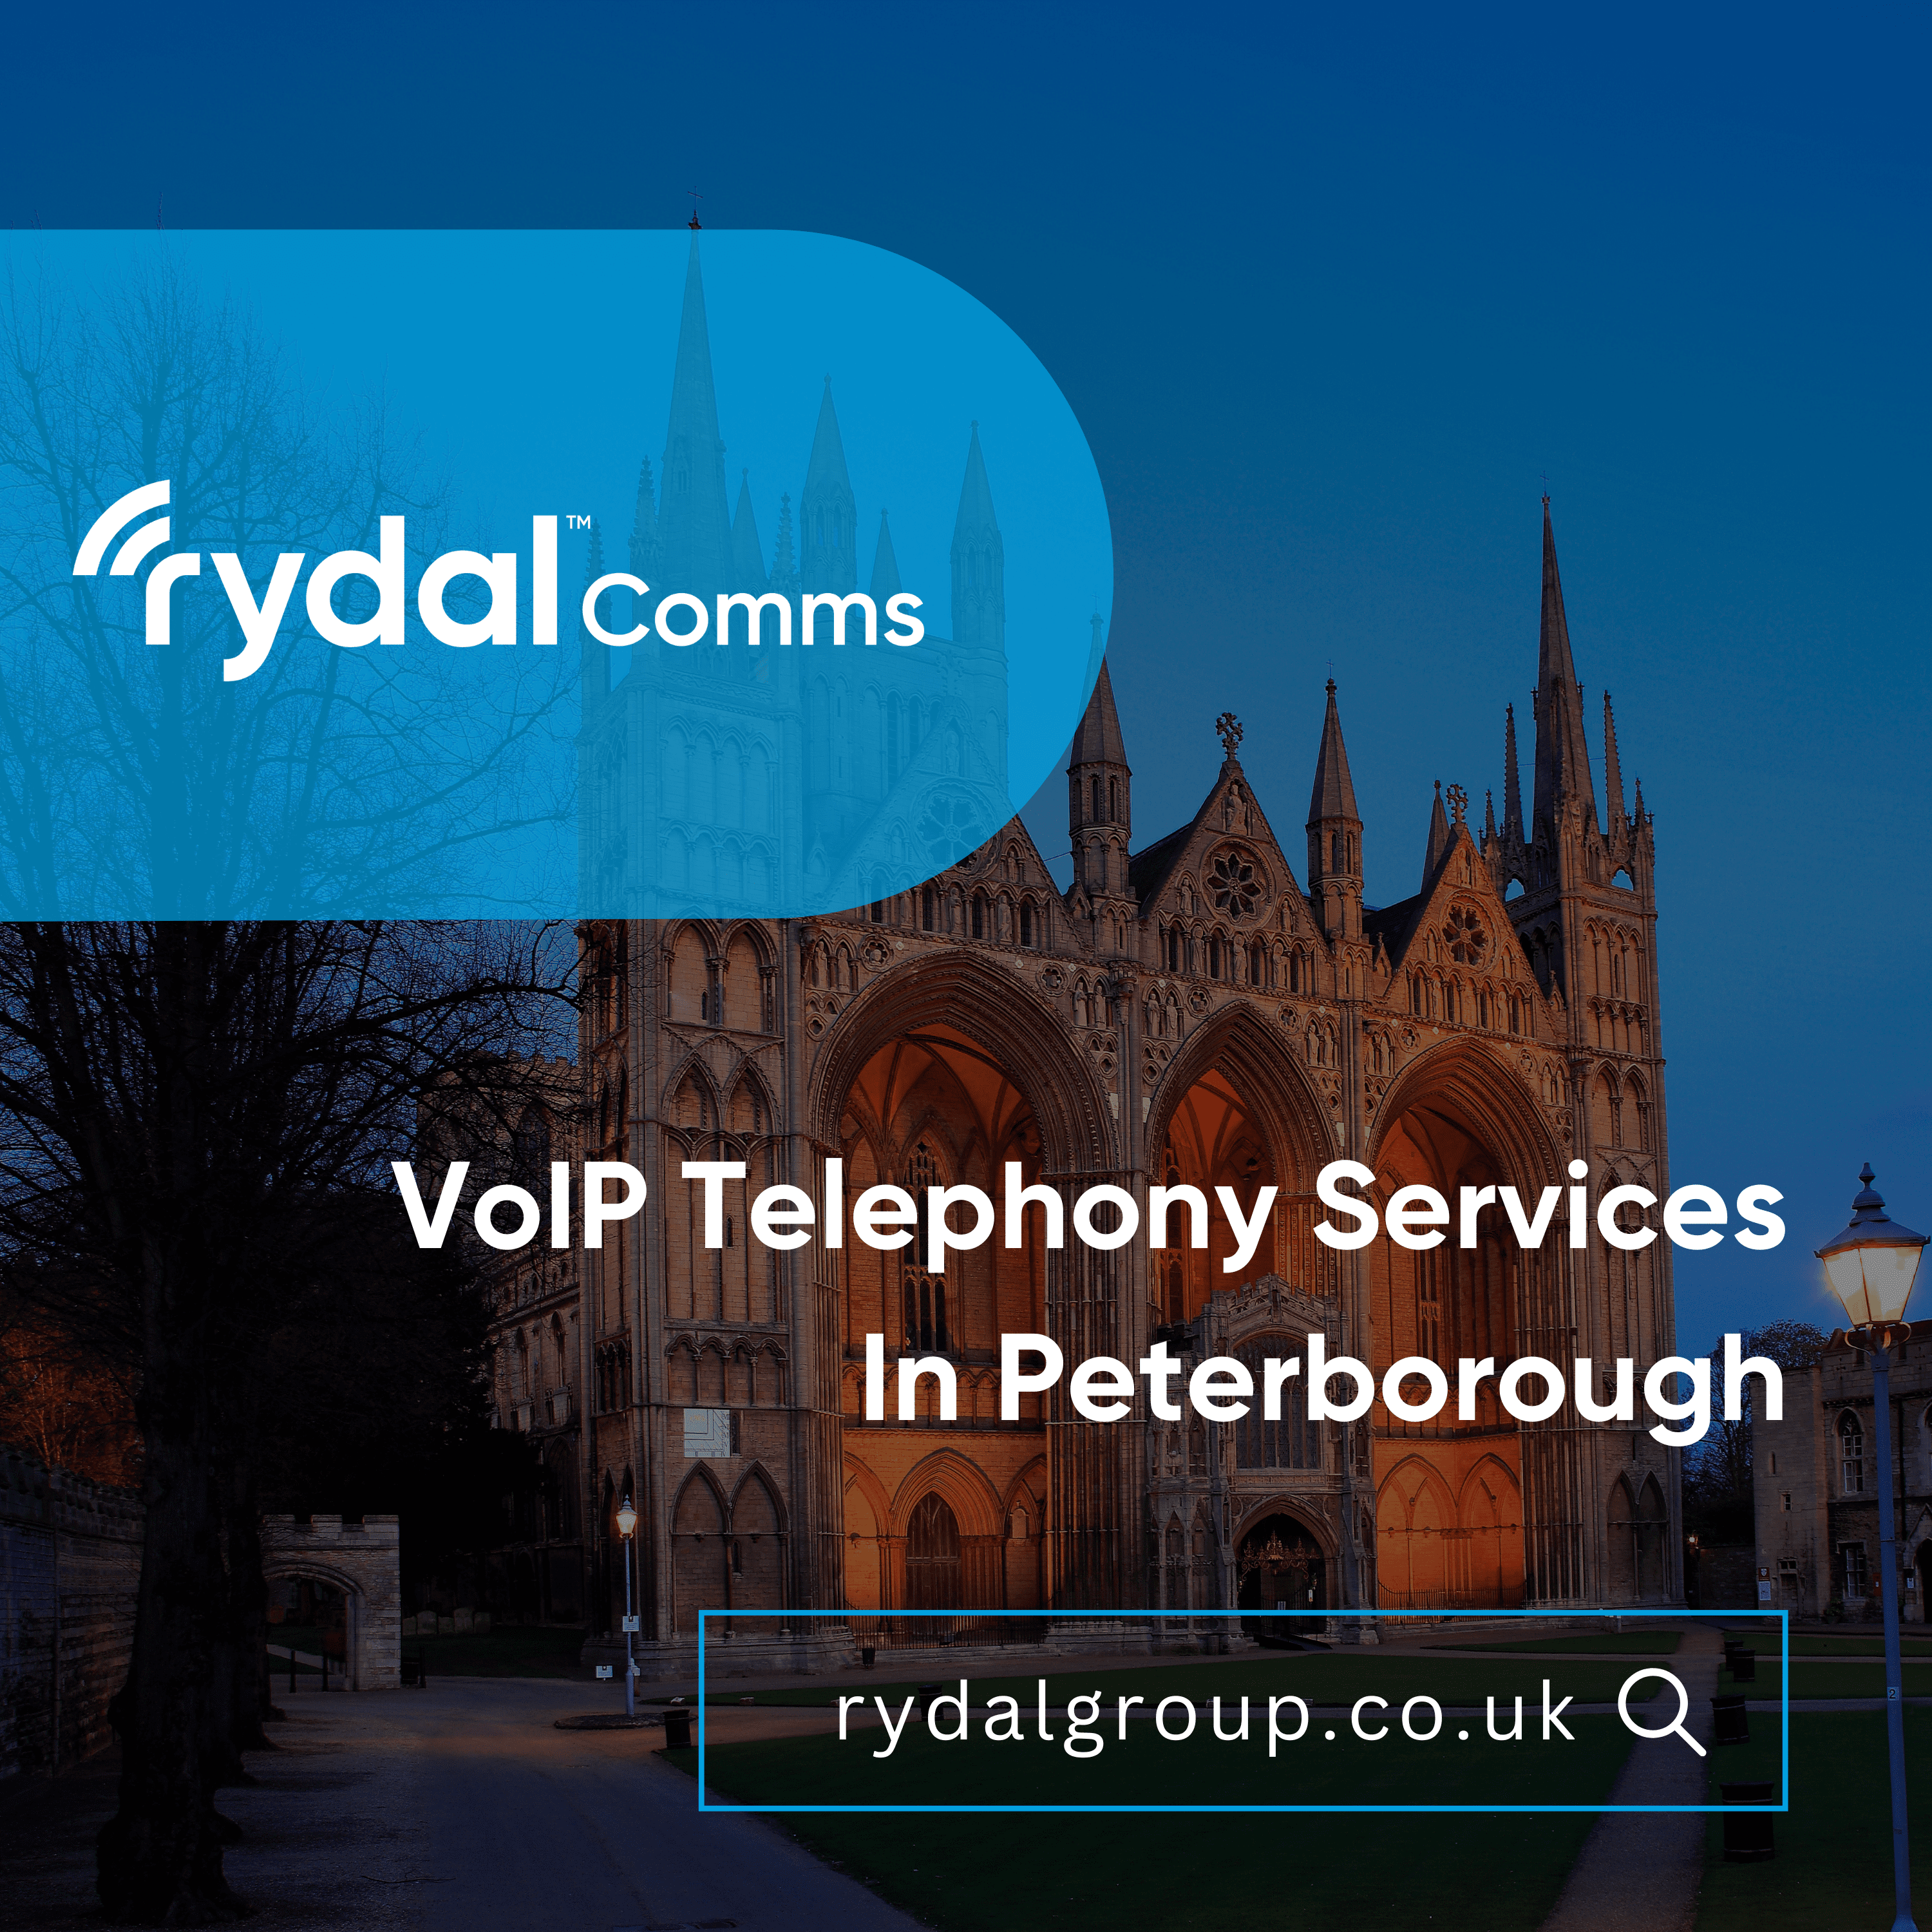 VoIP Telephony Services in Peterborough